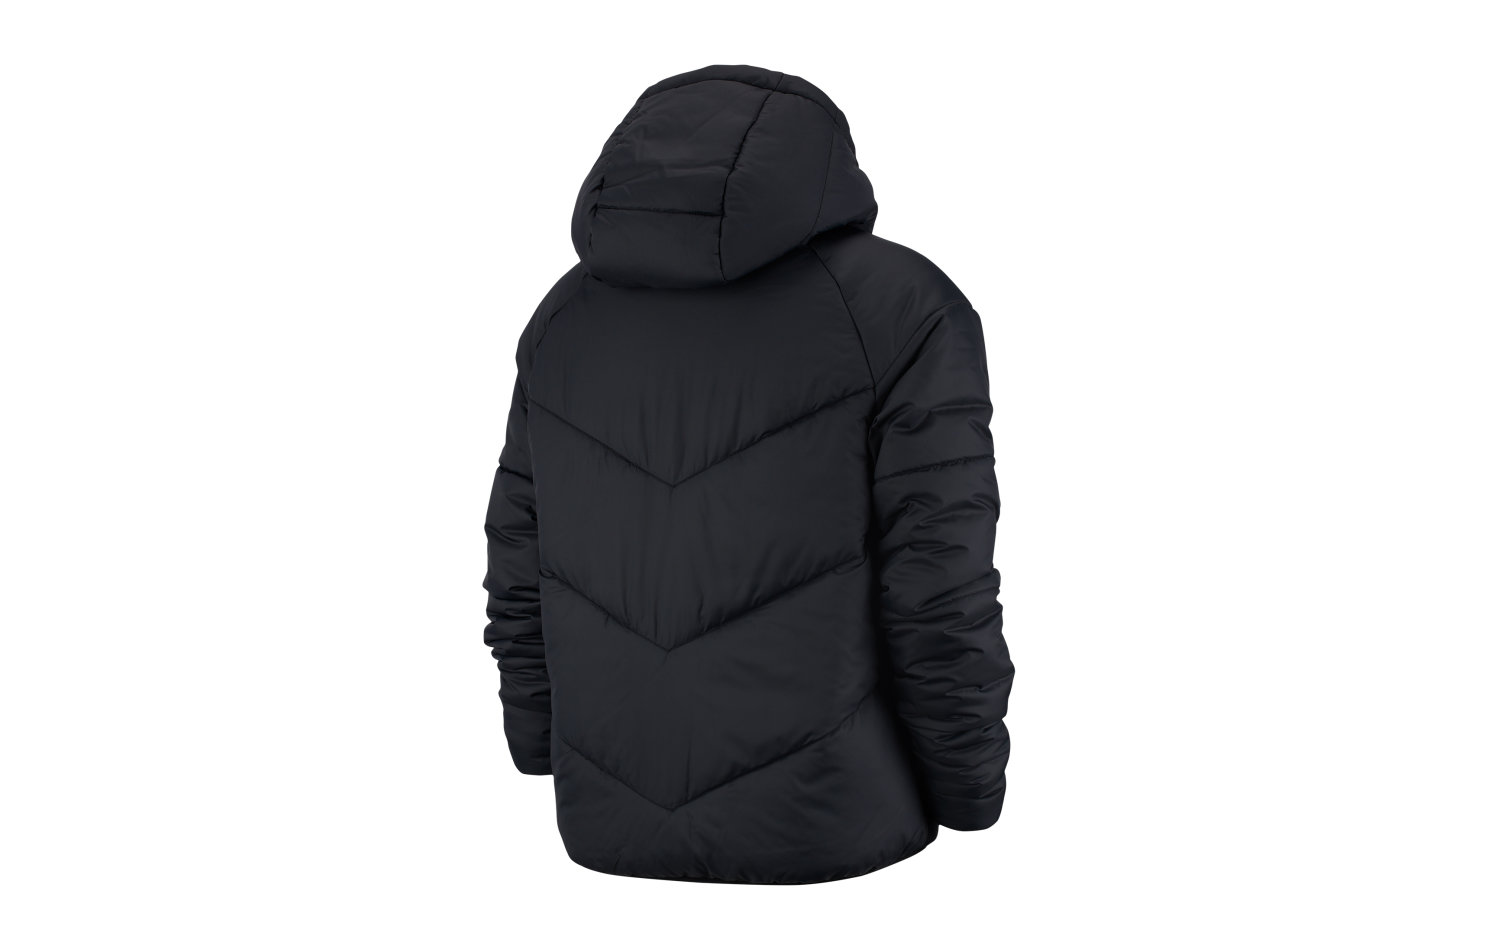 Nike Wmns Sw Windrunner Synthetic-fill Jacket (BV2906-010)